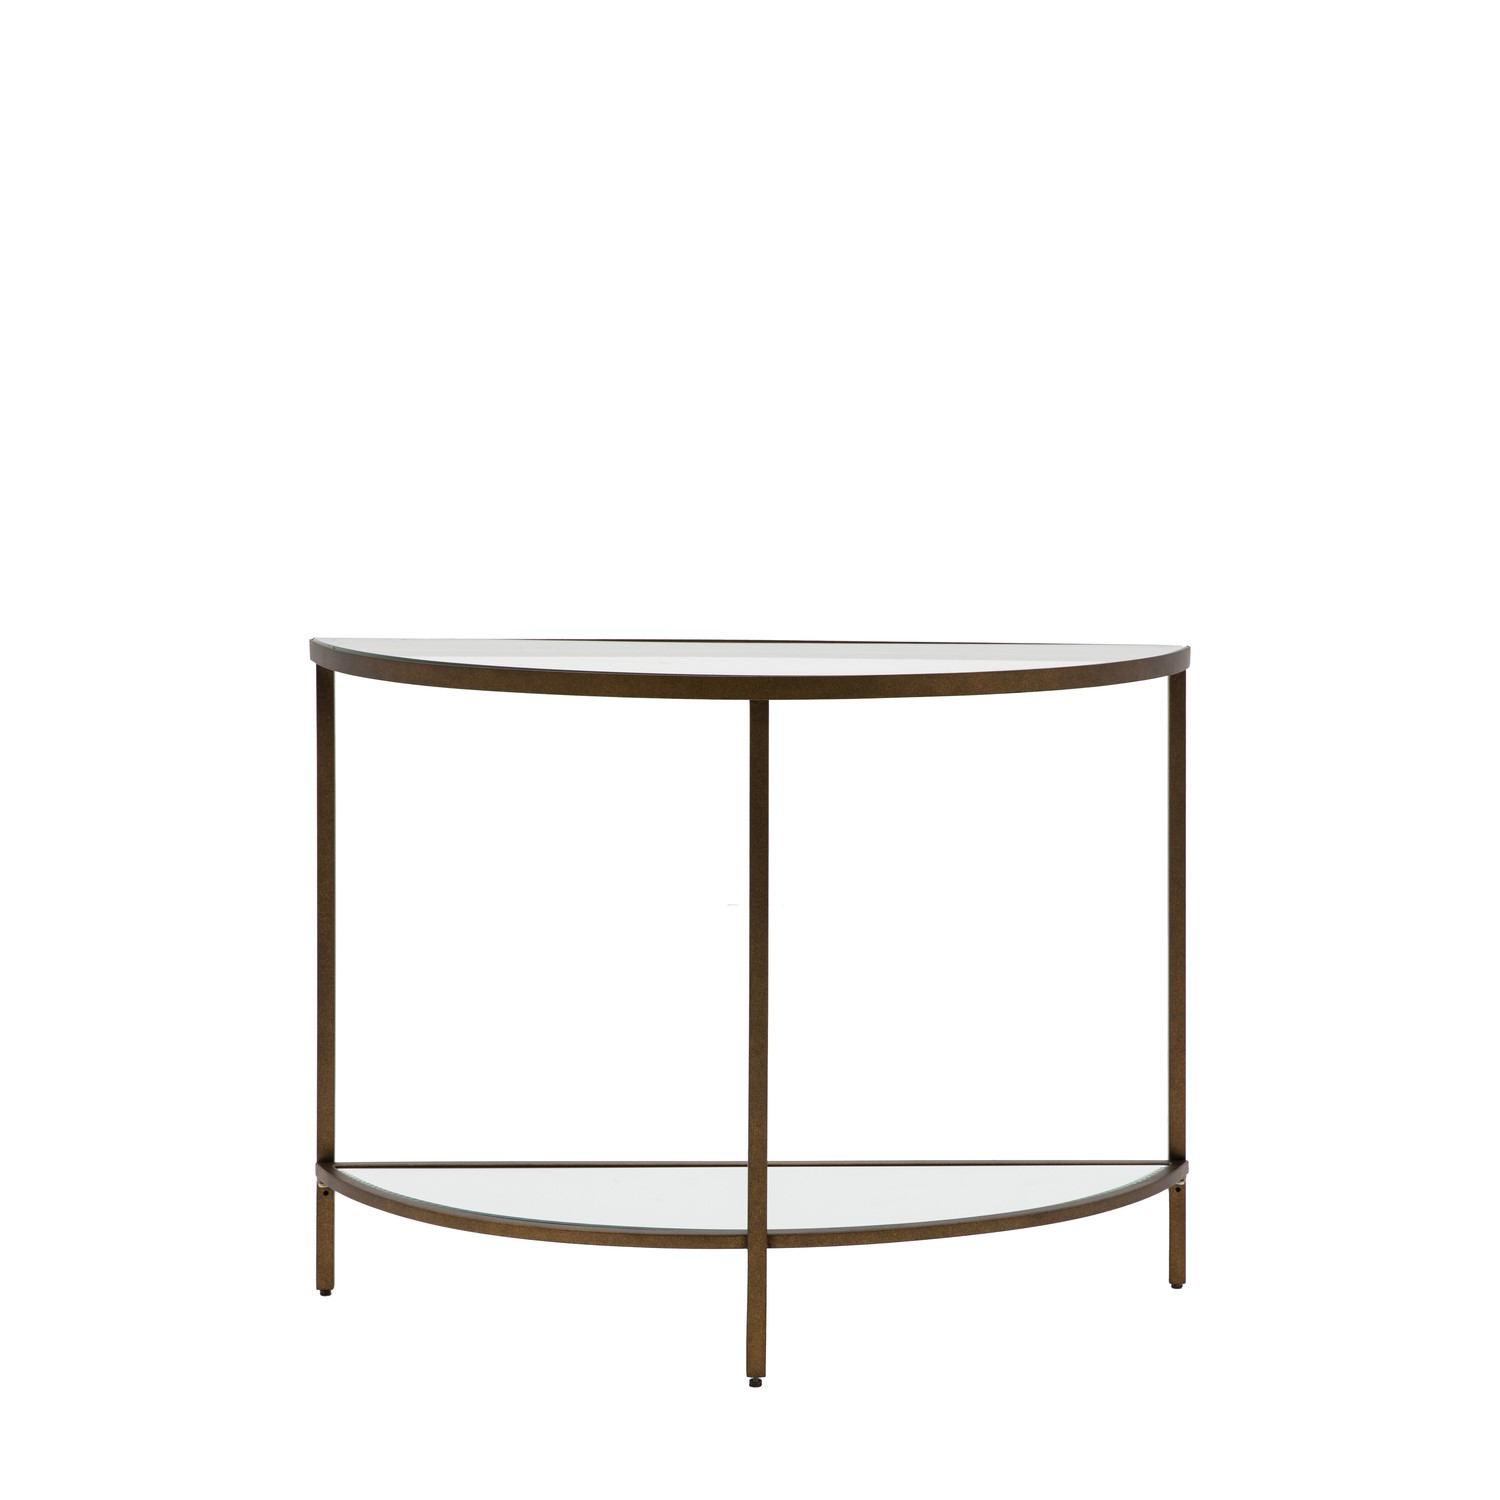 Photo of Hudson glass console table in bronze - caspian house